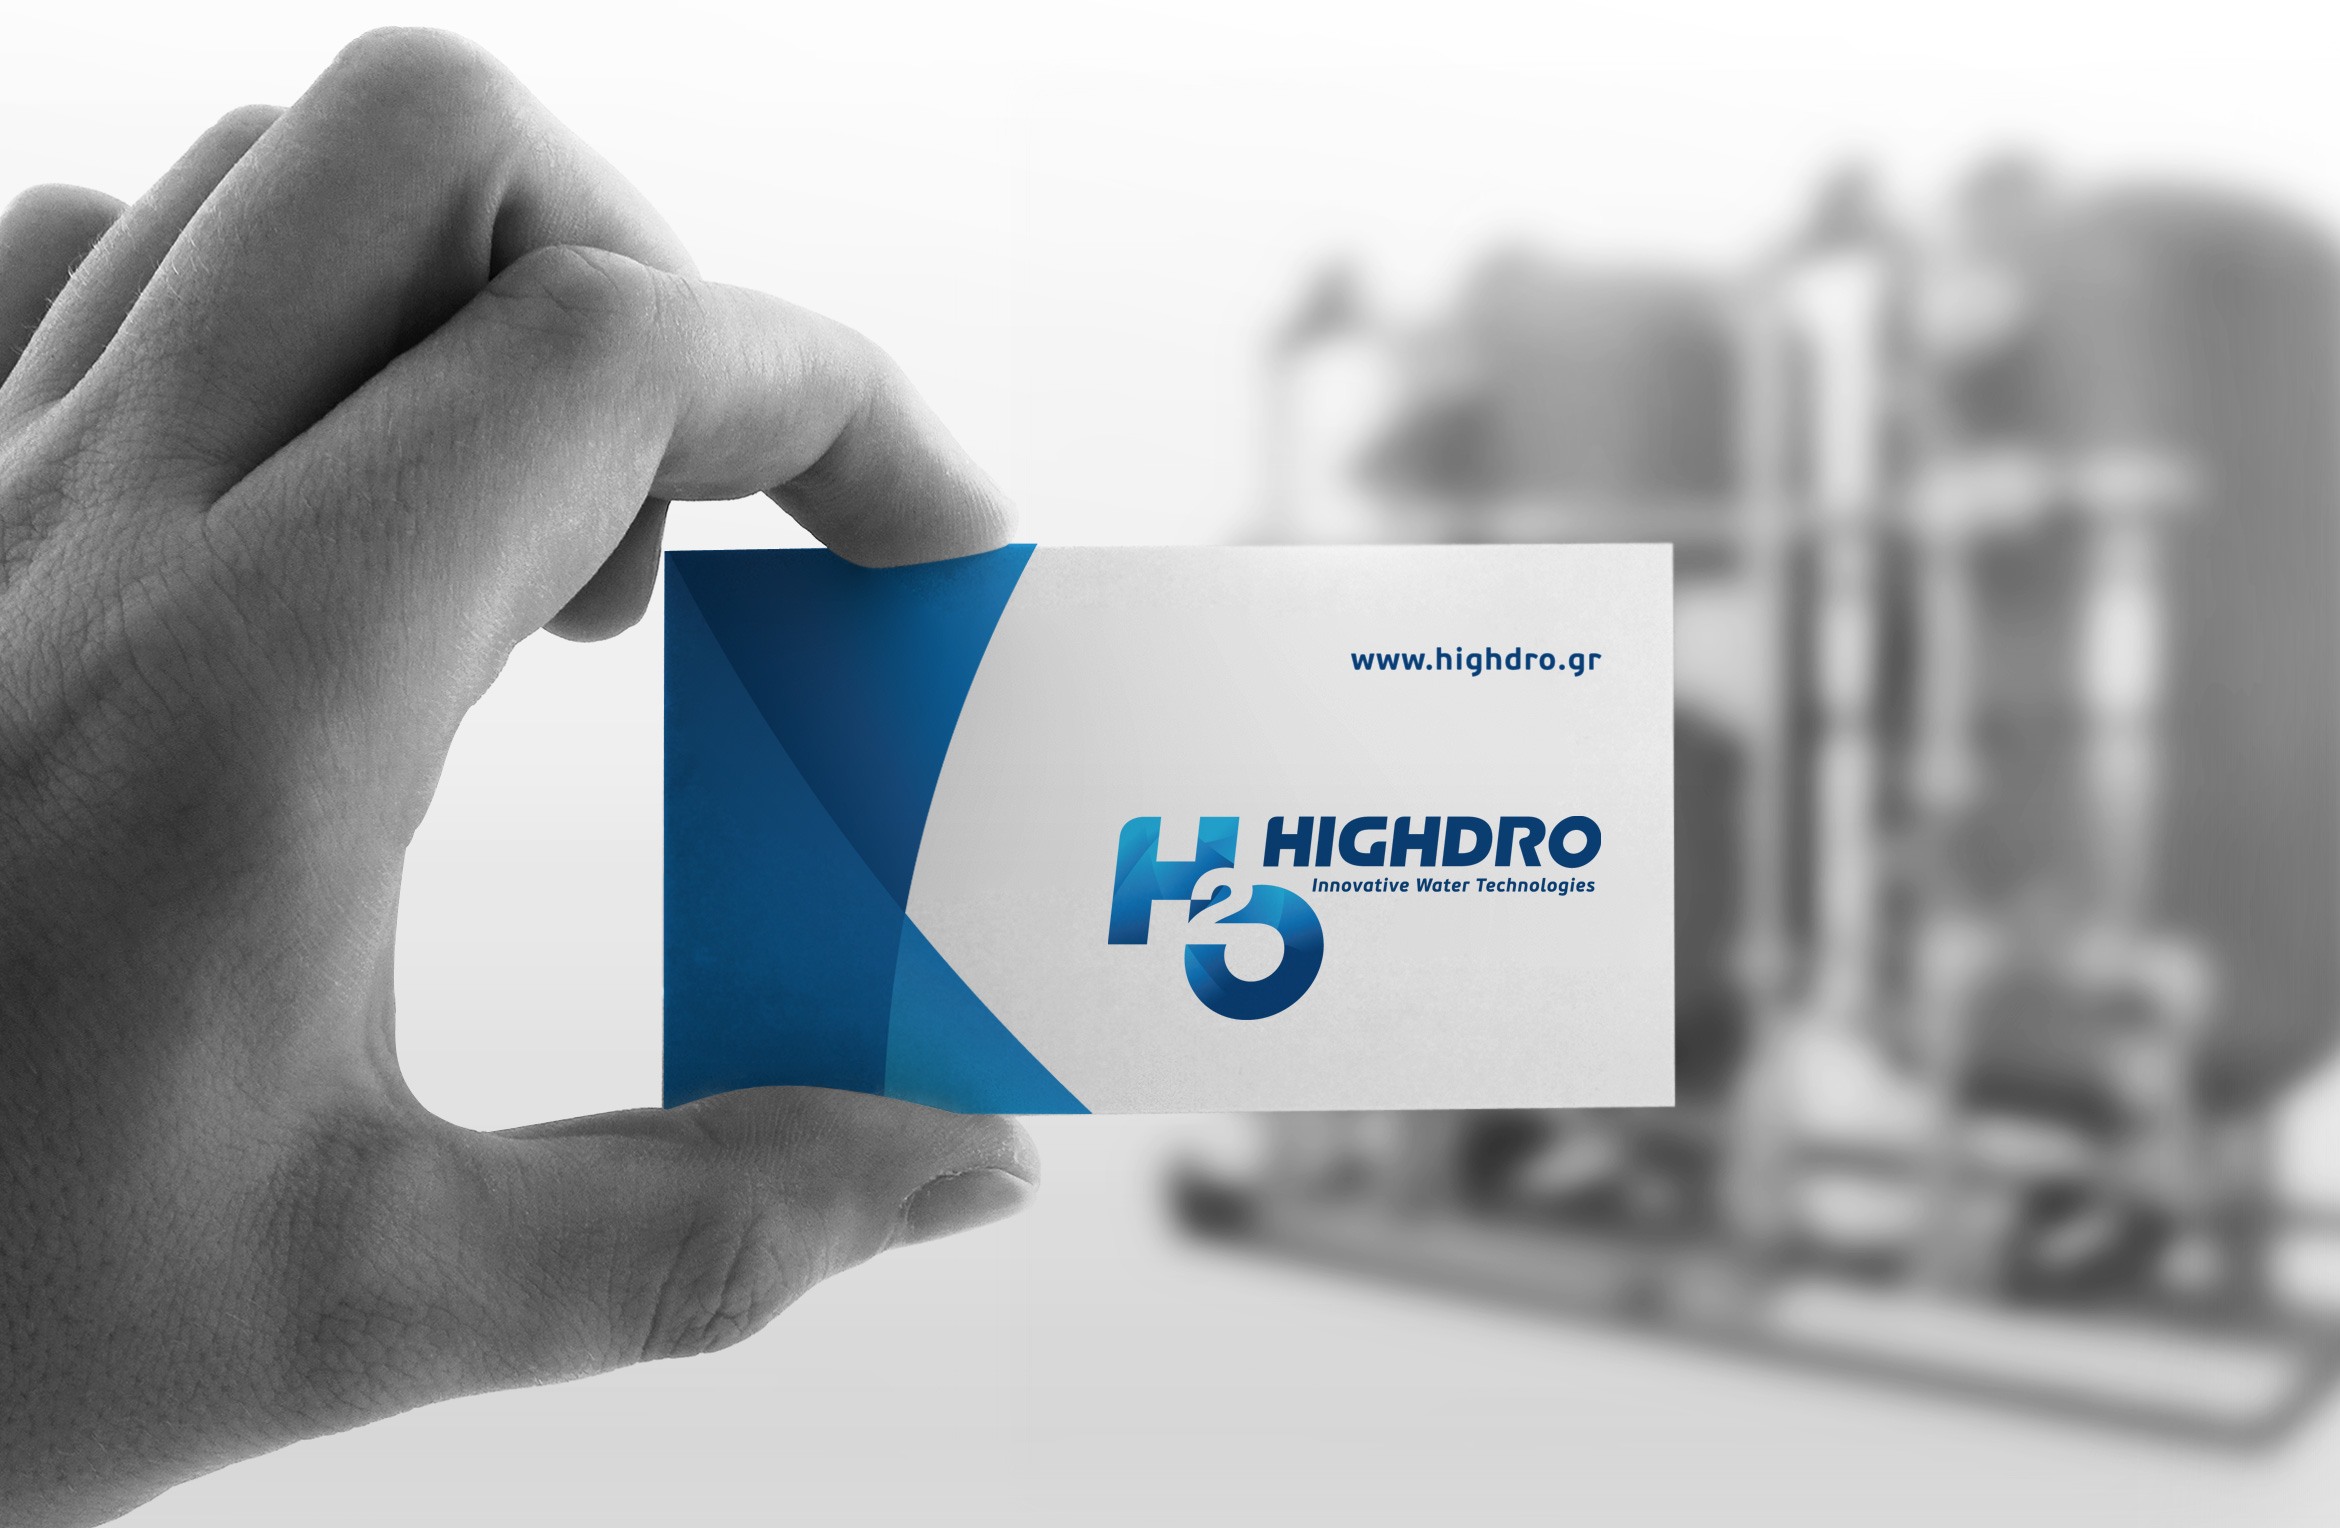 Highdro business cards